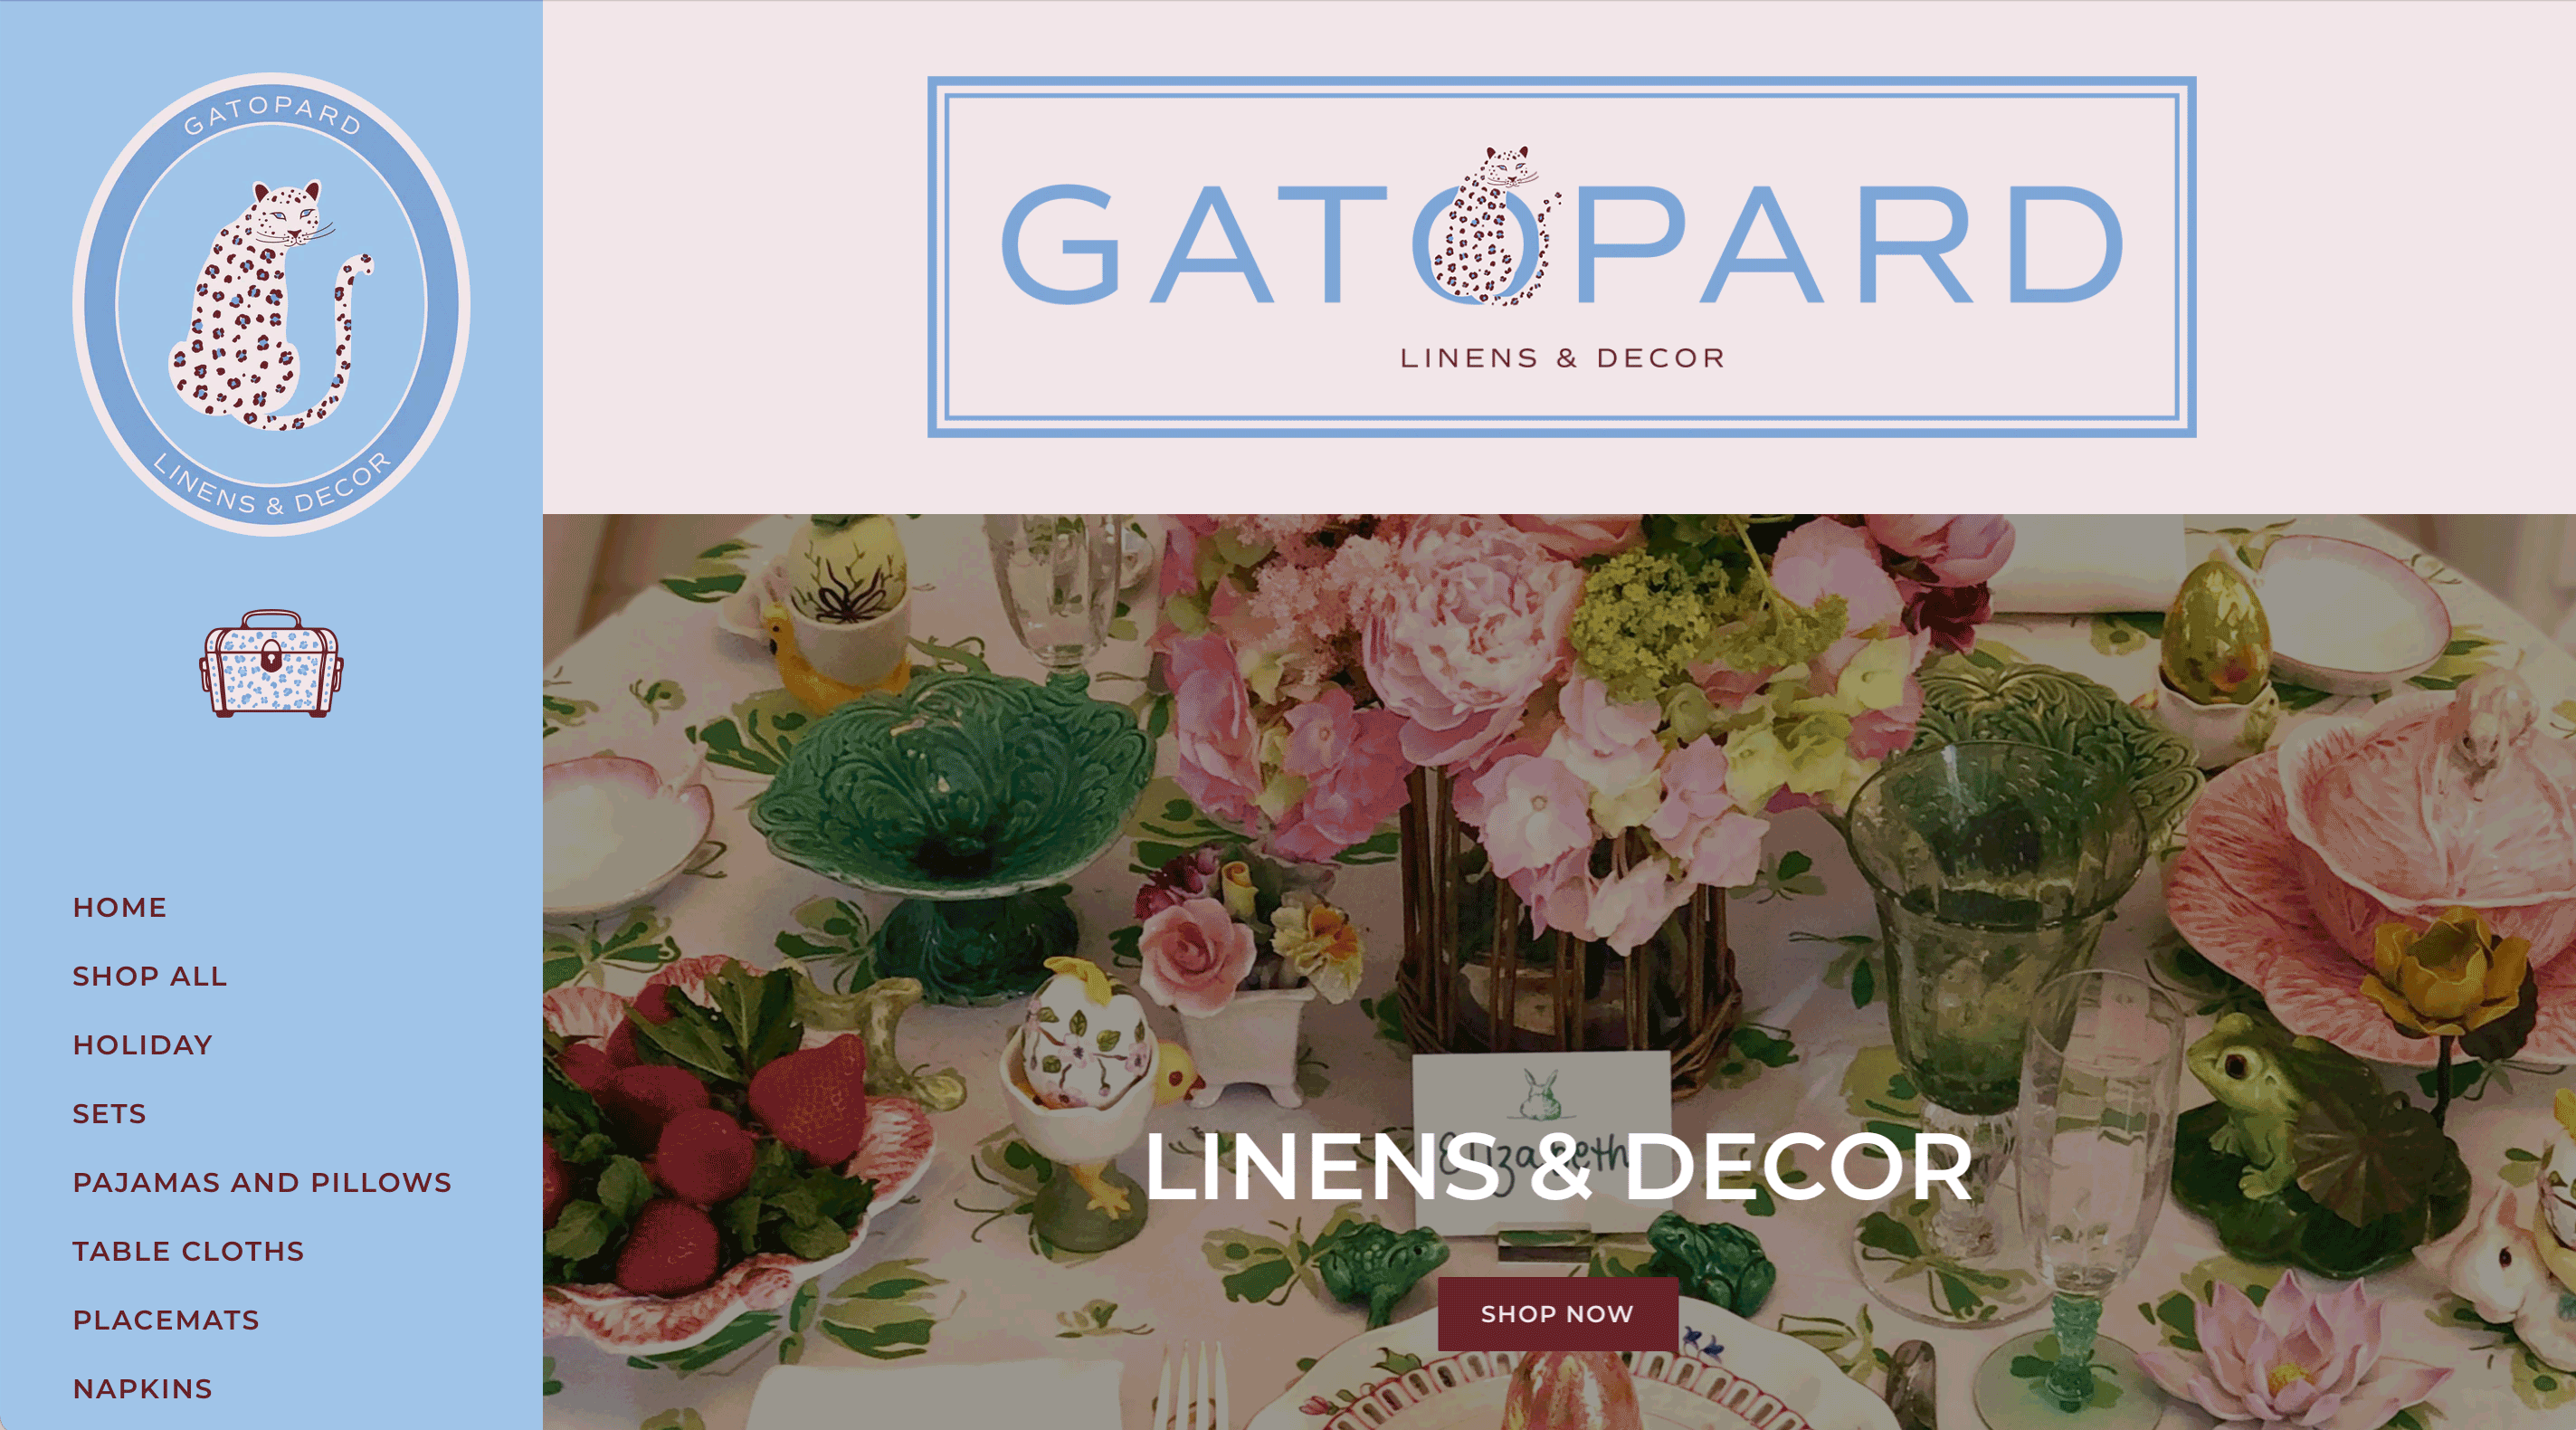 Gatopard Linens & Decor homepage with leopard print animation